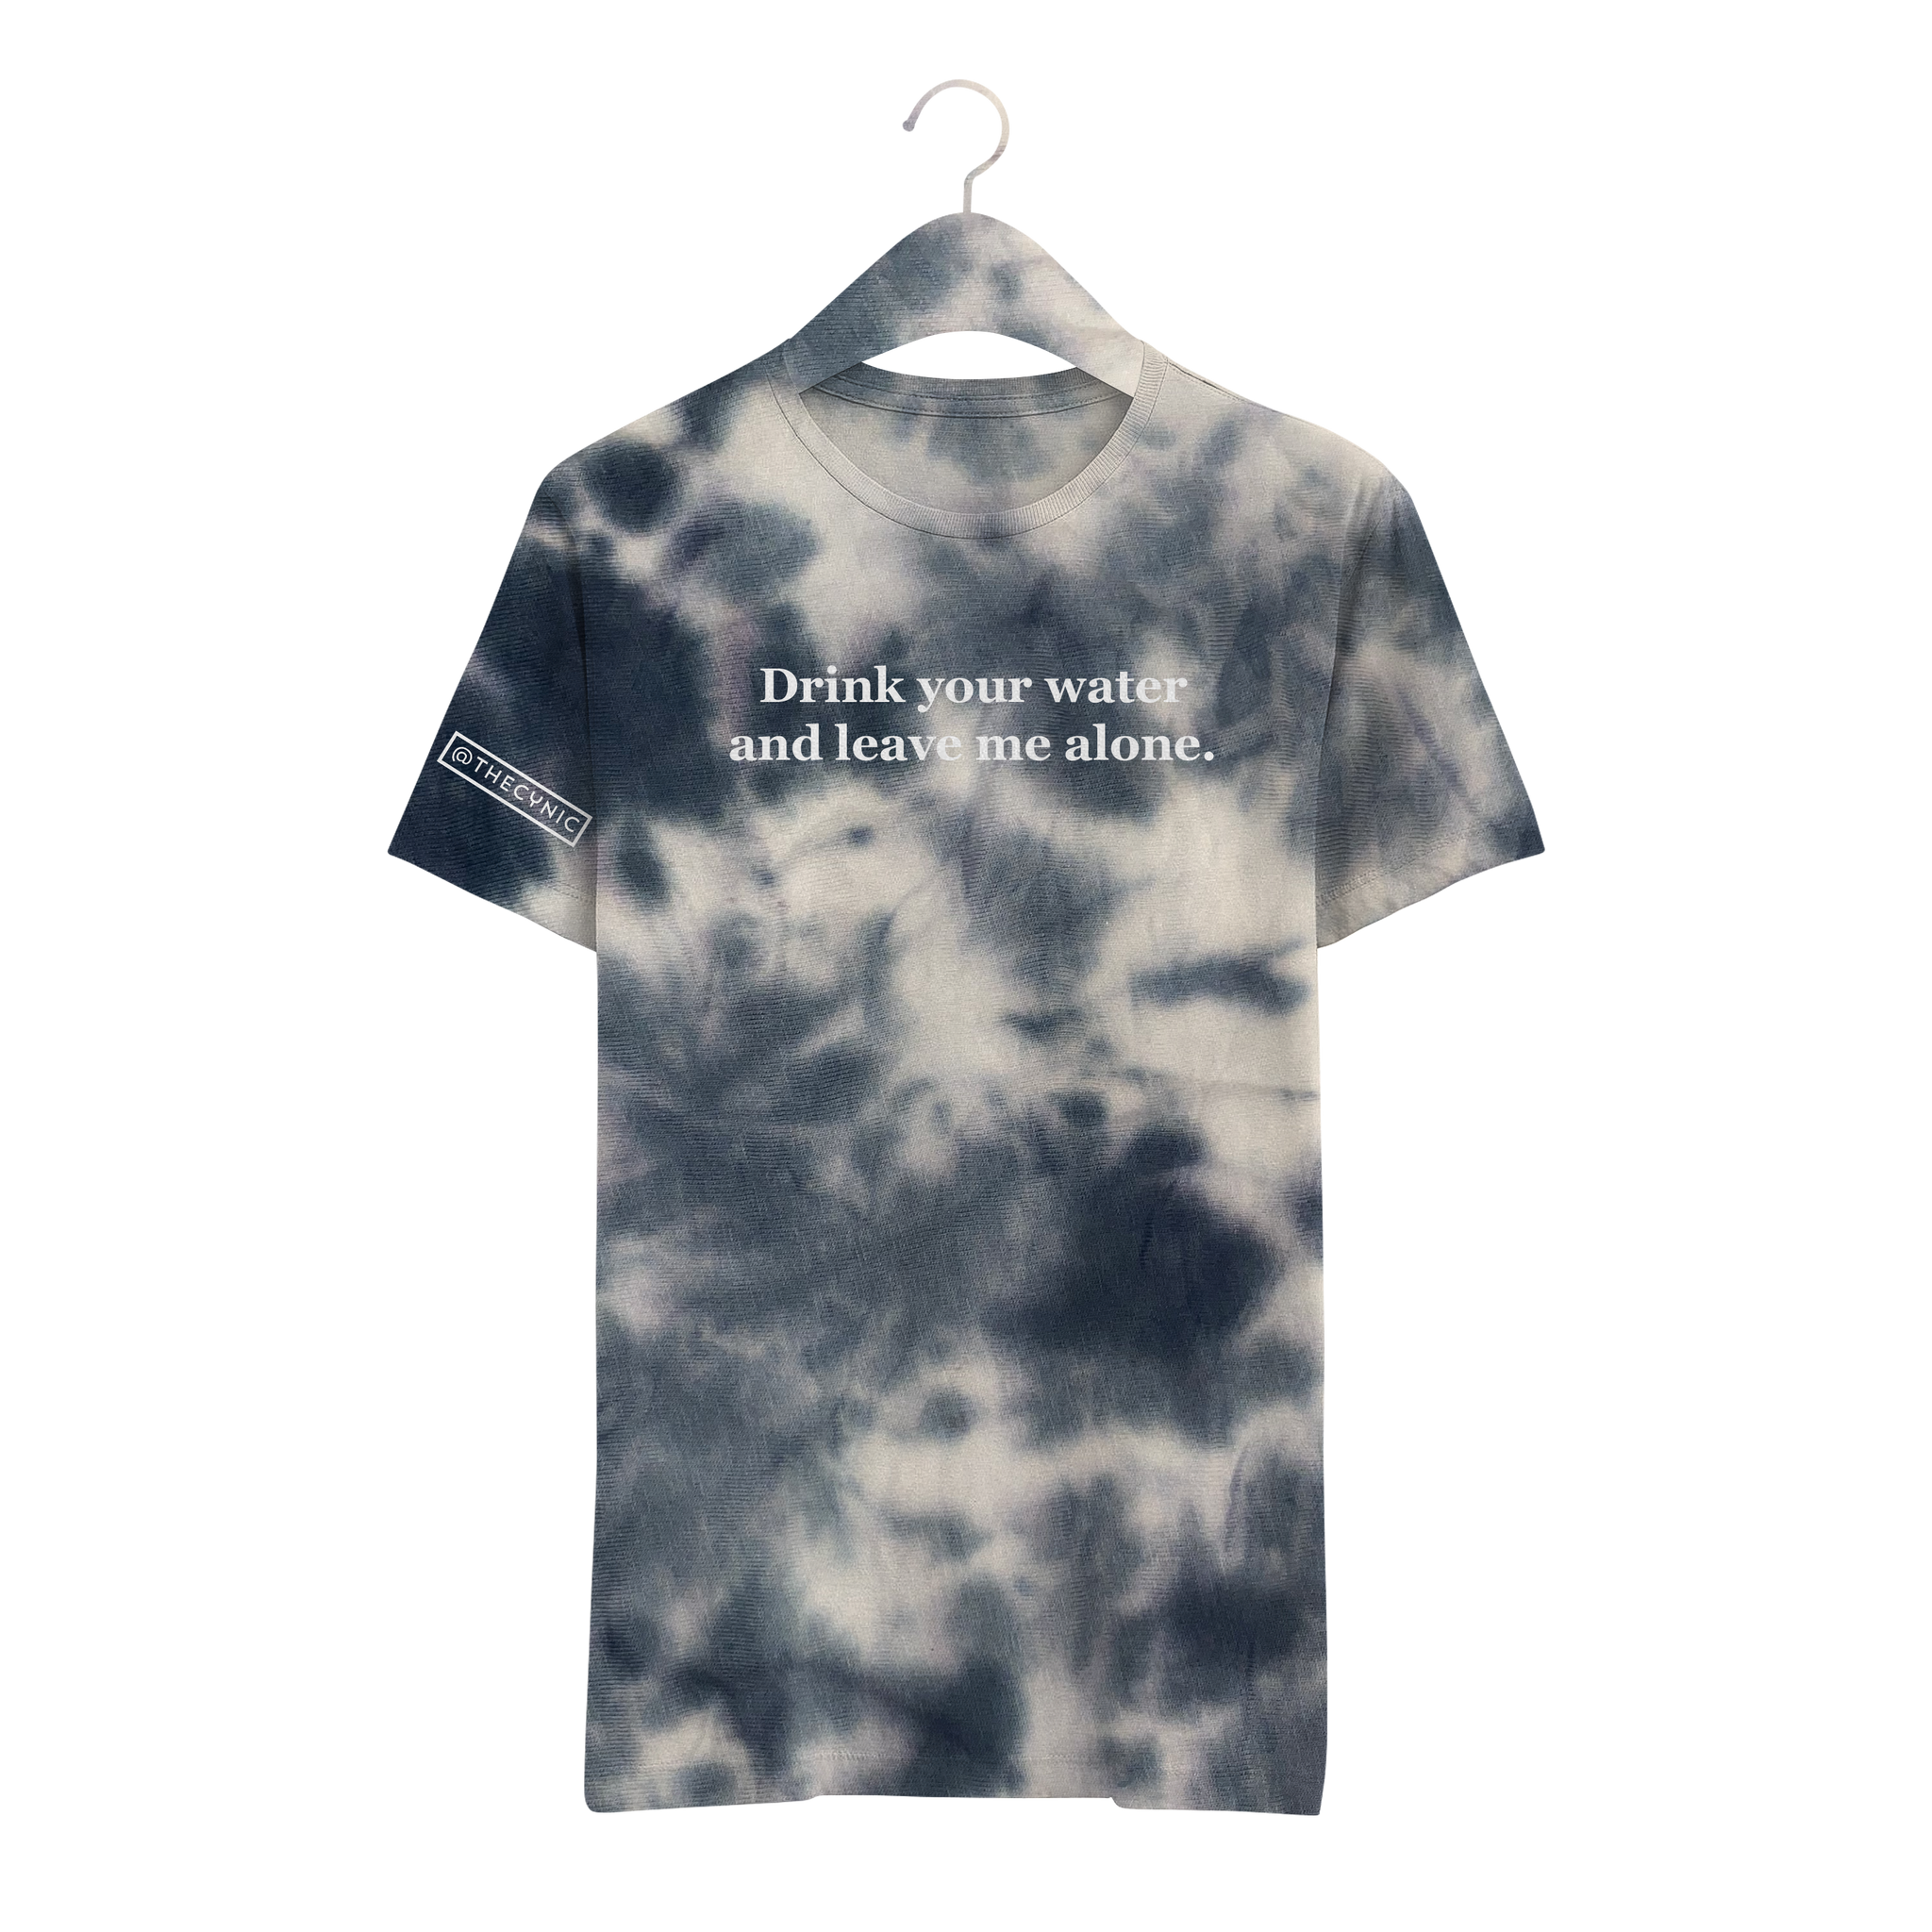 Drink your water and leave me alone. - Unisex Tee